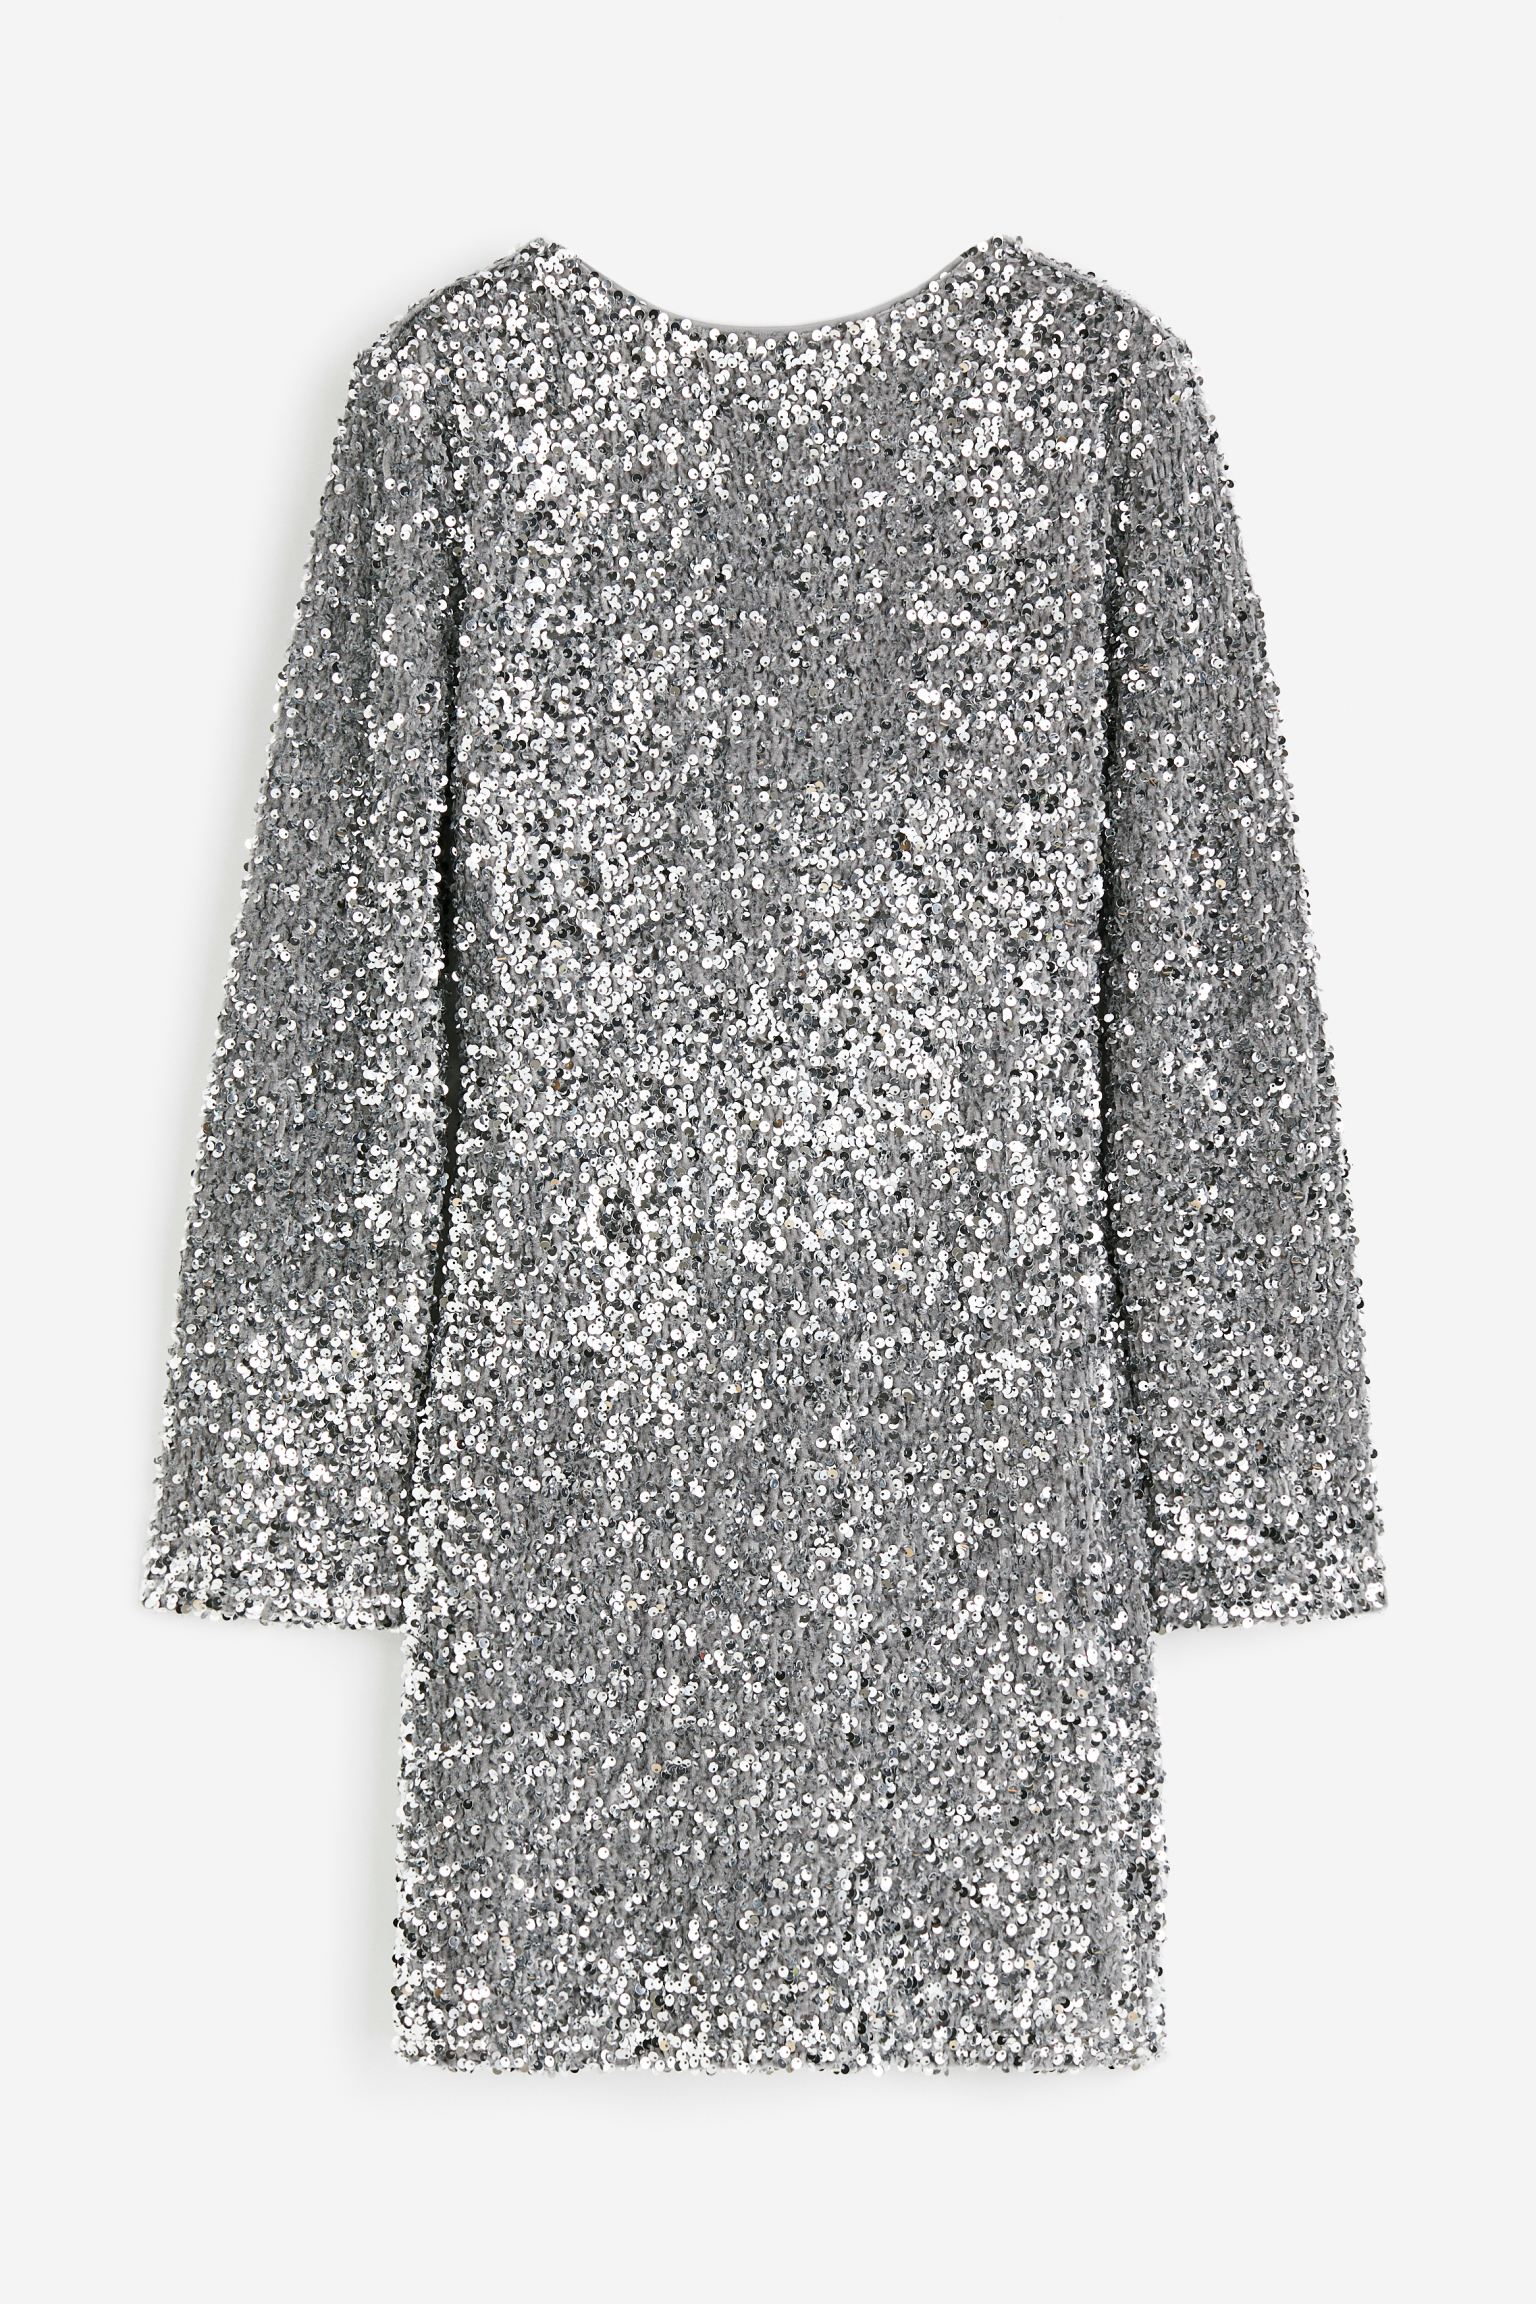 Платье H&M Sequined With Low-cut Back, серебристый pierre cardın women back low cut ruched nightgown